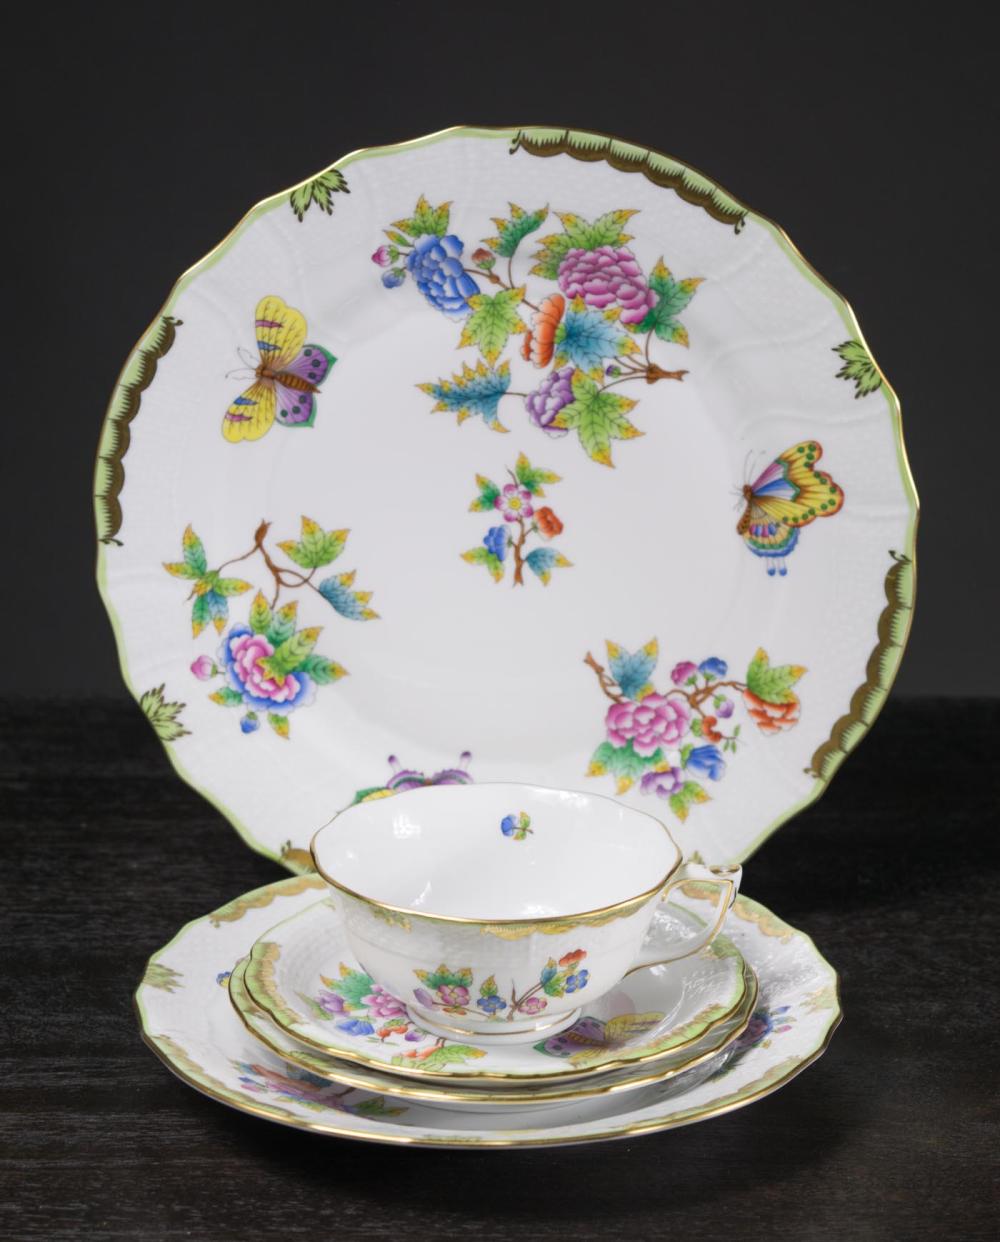 HEREND FINE CHINA DINNER SERVICE